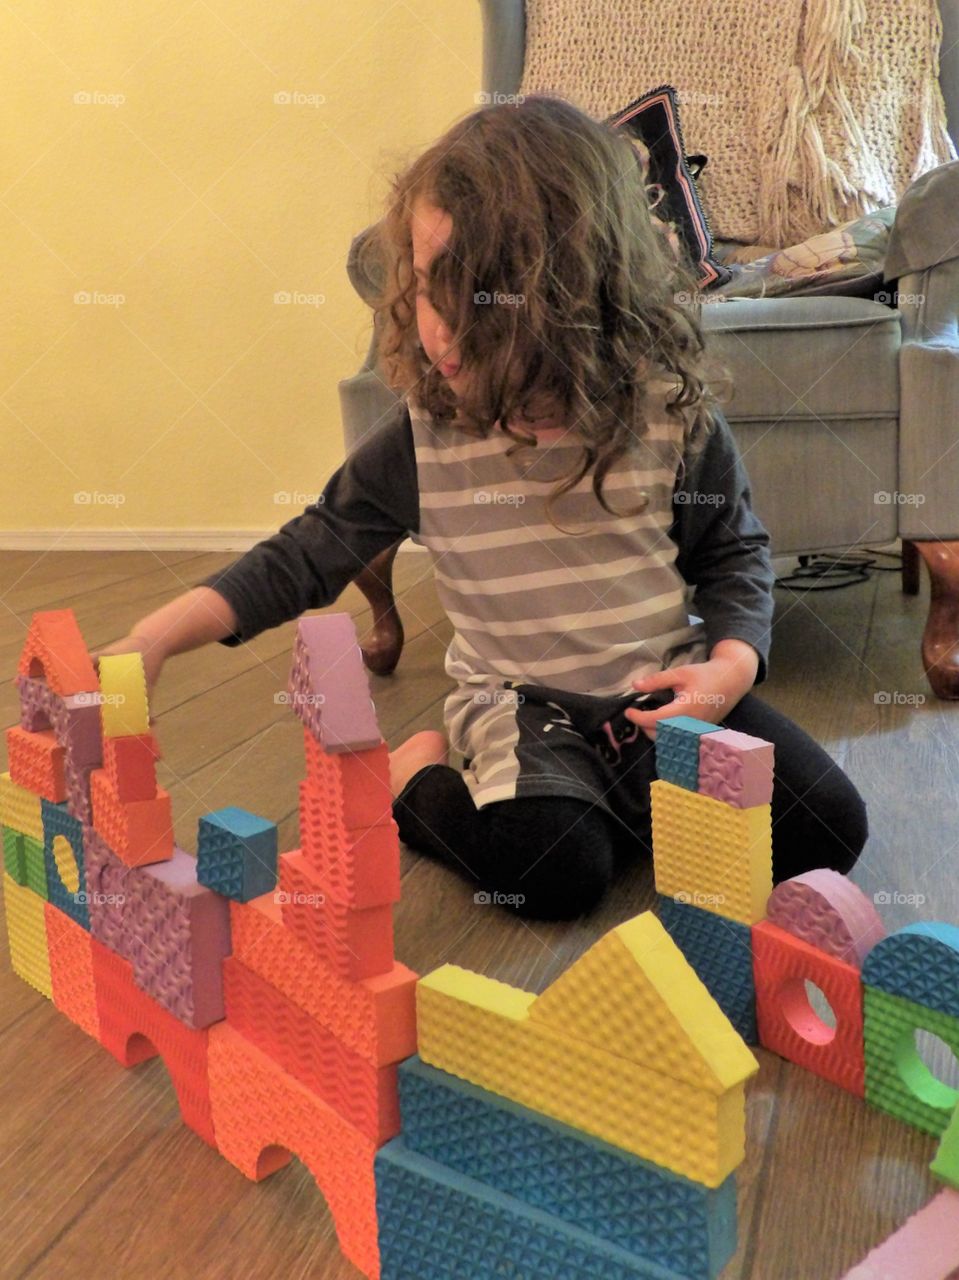 Building with blocks